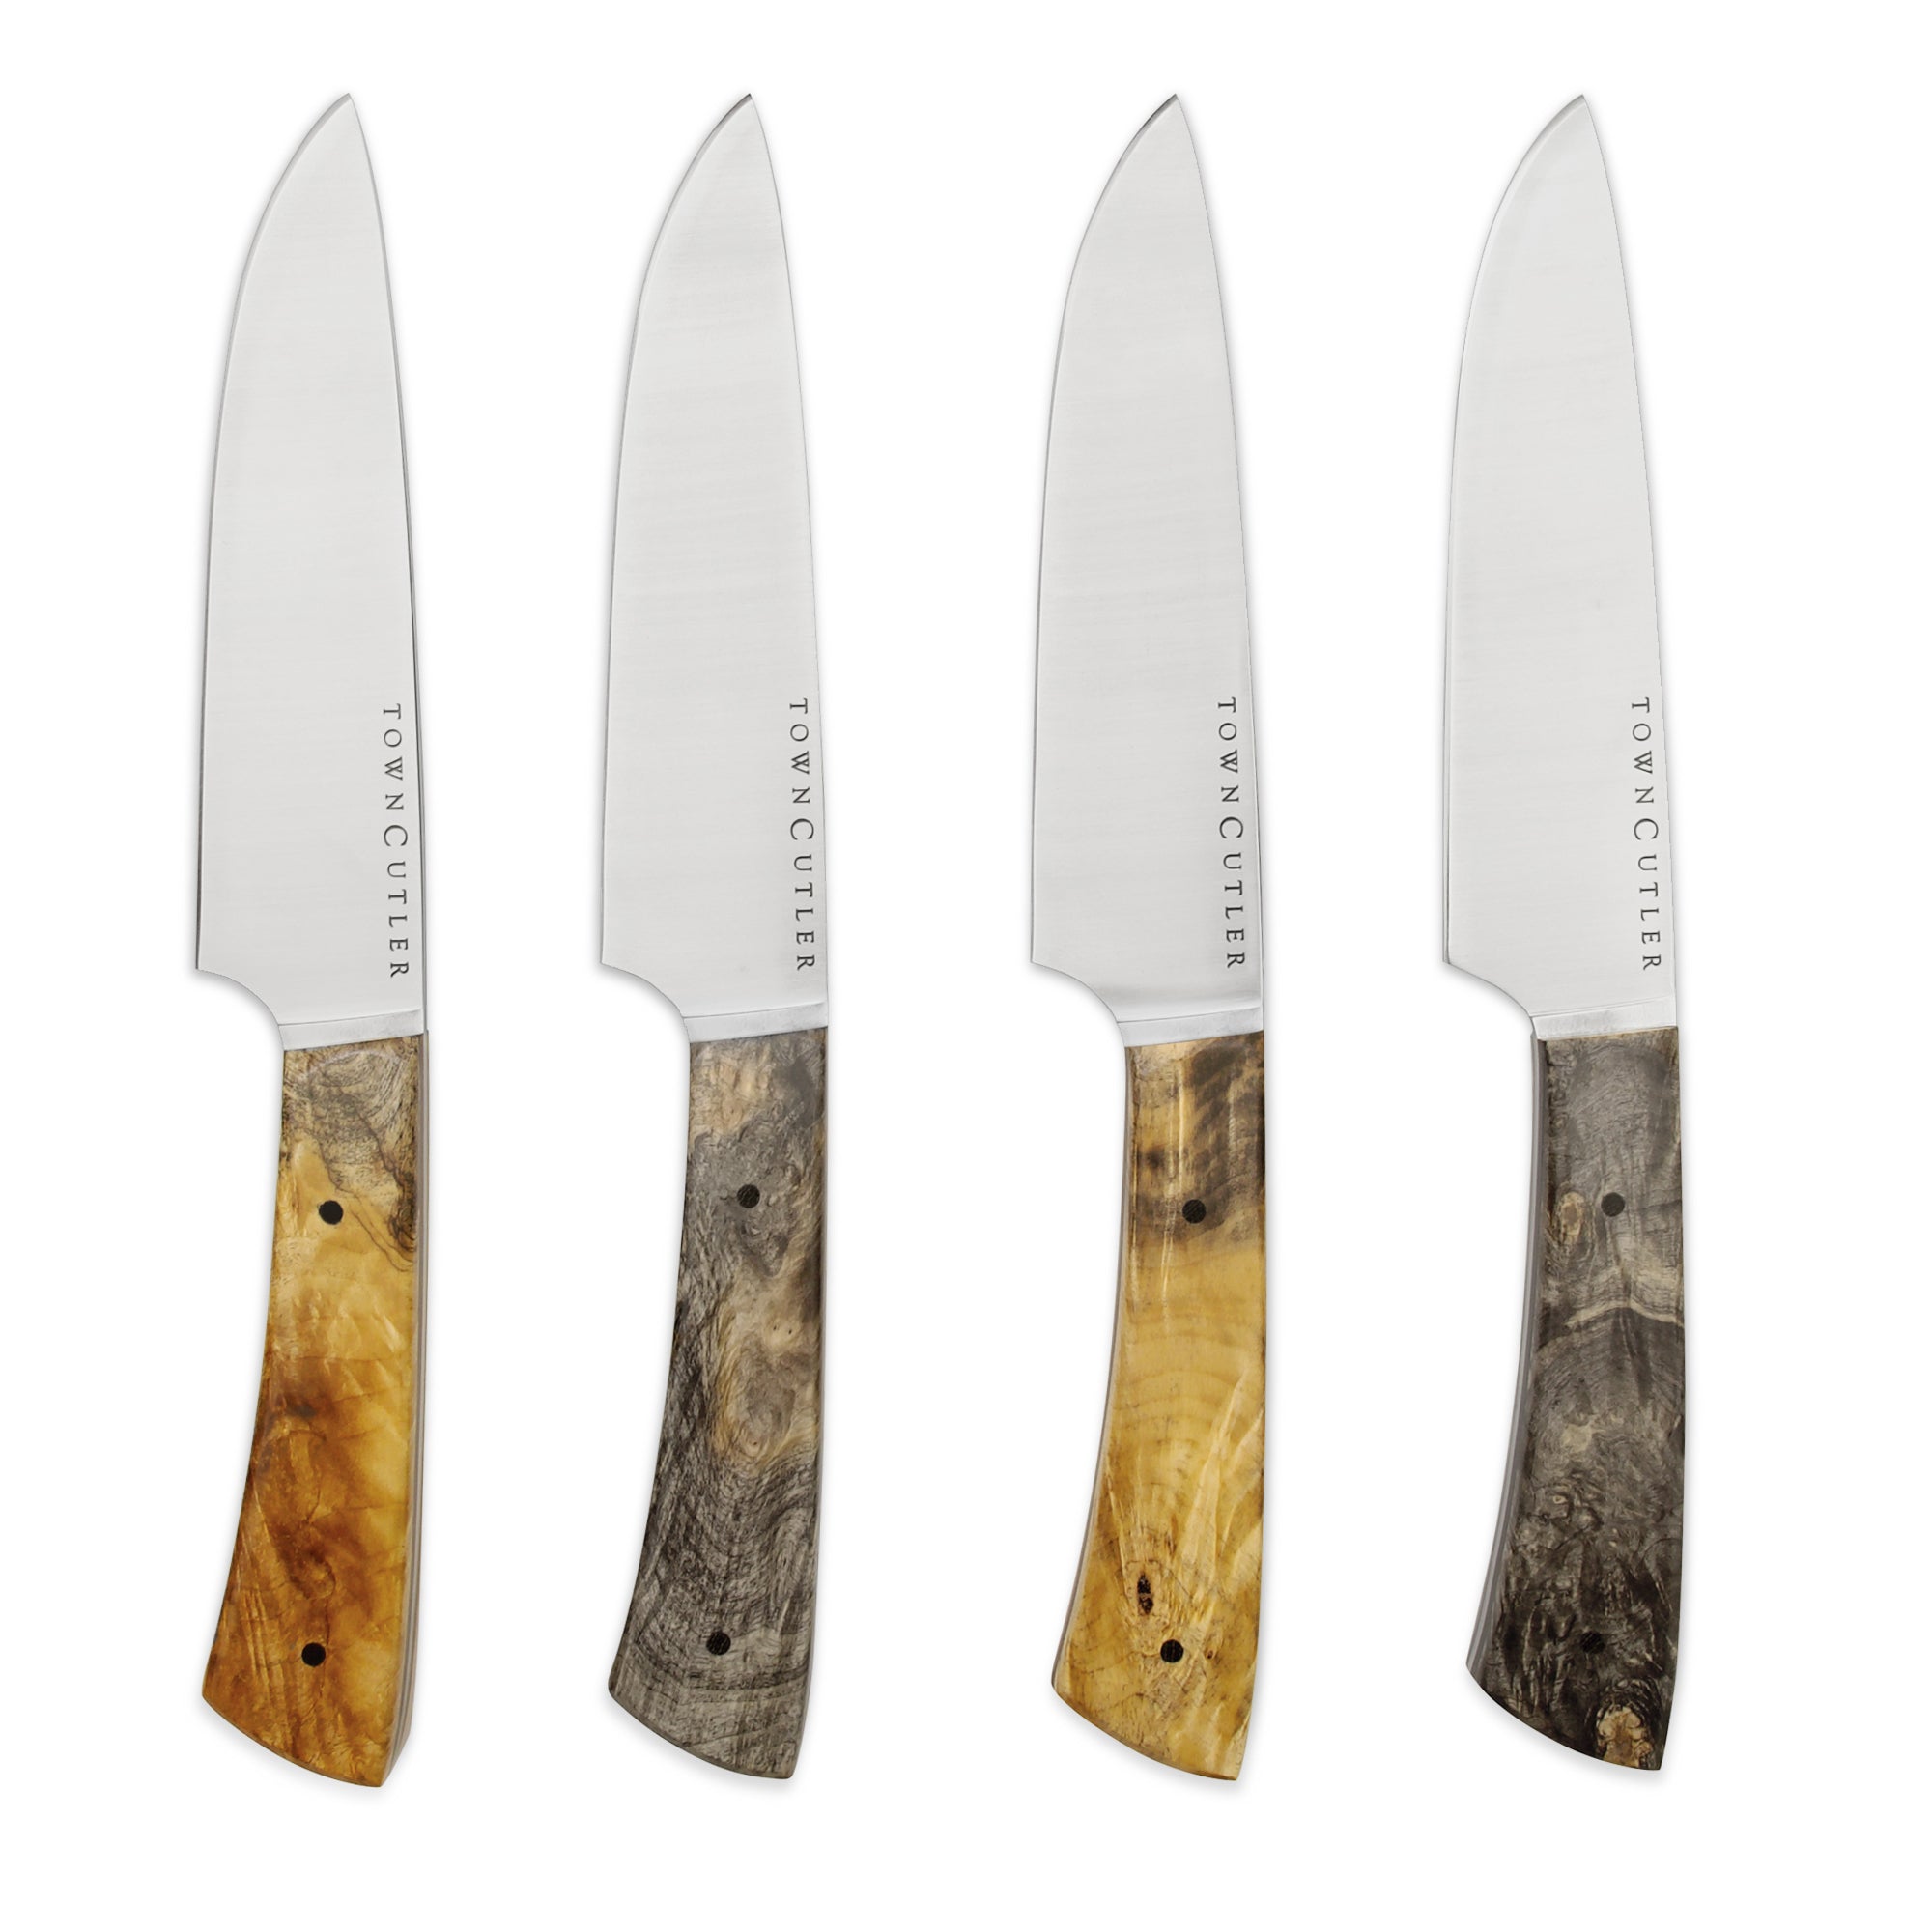 Classic steakhouse style steak knives made with Buckeye Burl wood handle and stainless steel blade. Town Cutler Classic steak knives set of 4, made in the USA, non-serrated, straight edge, full tang. 